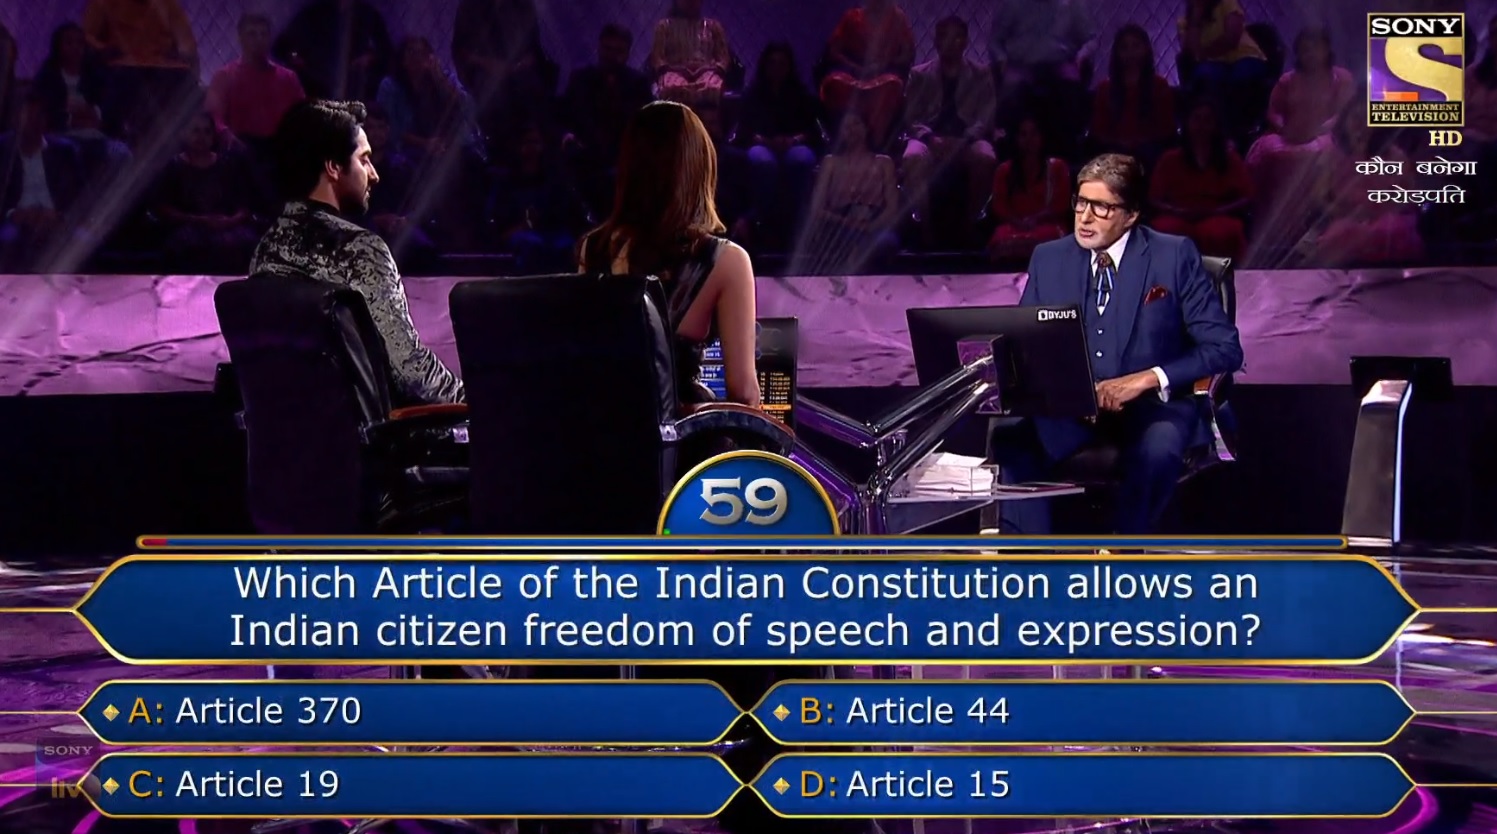 Ques : Which Article of the Indian Constitution allows an Indian citizen freedom of speech and expression?